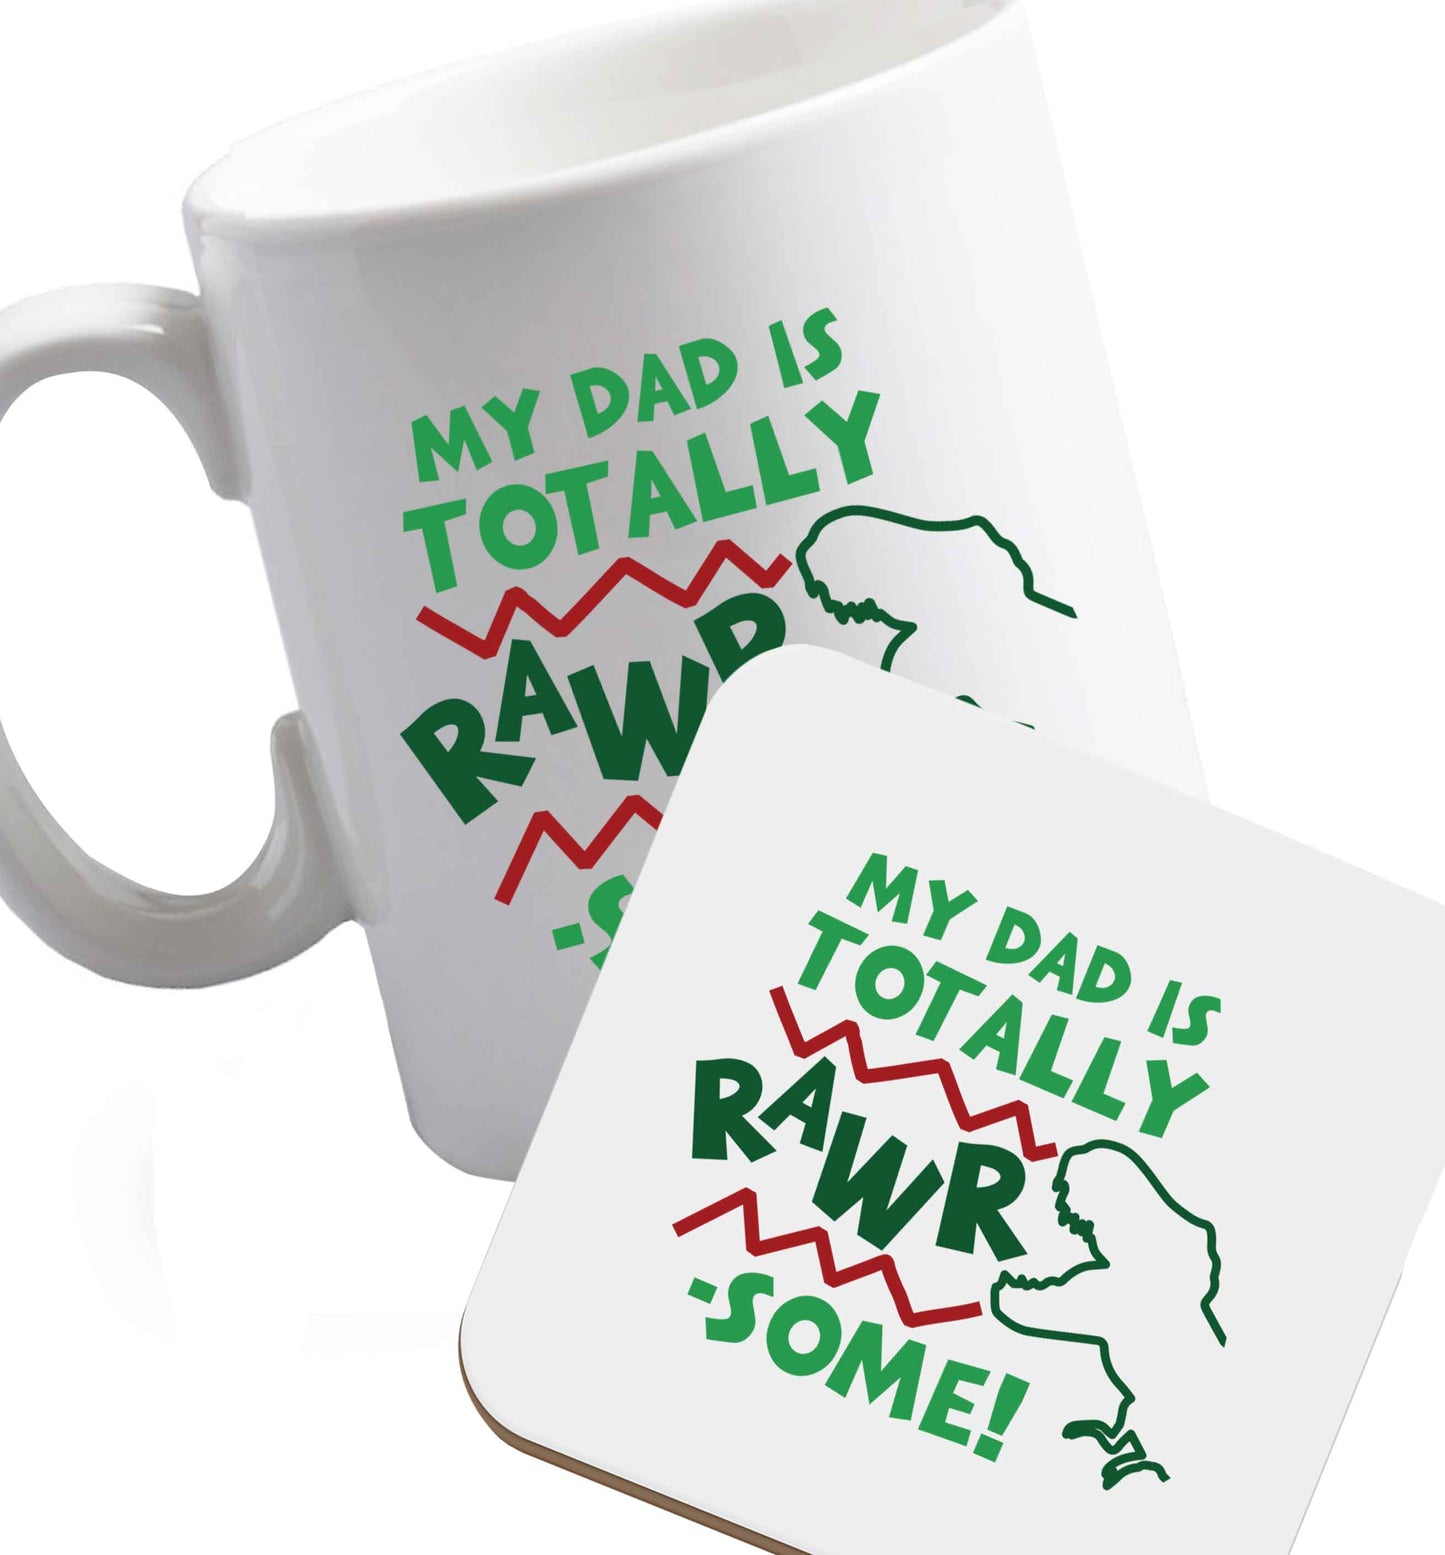 10 oz My dad is totally rawrsome ceramic mug and coaster set right handed